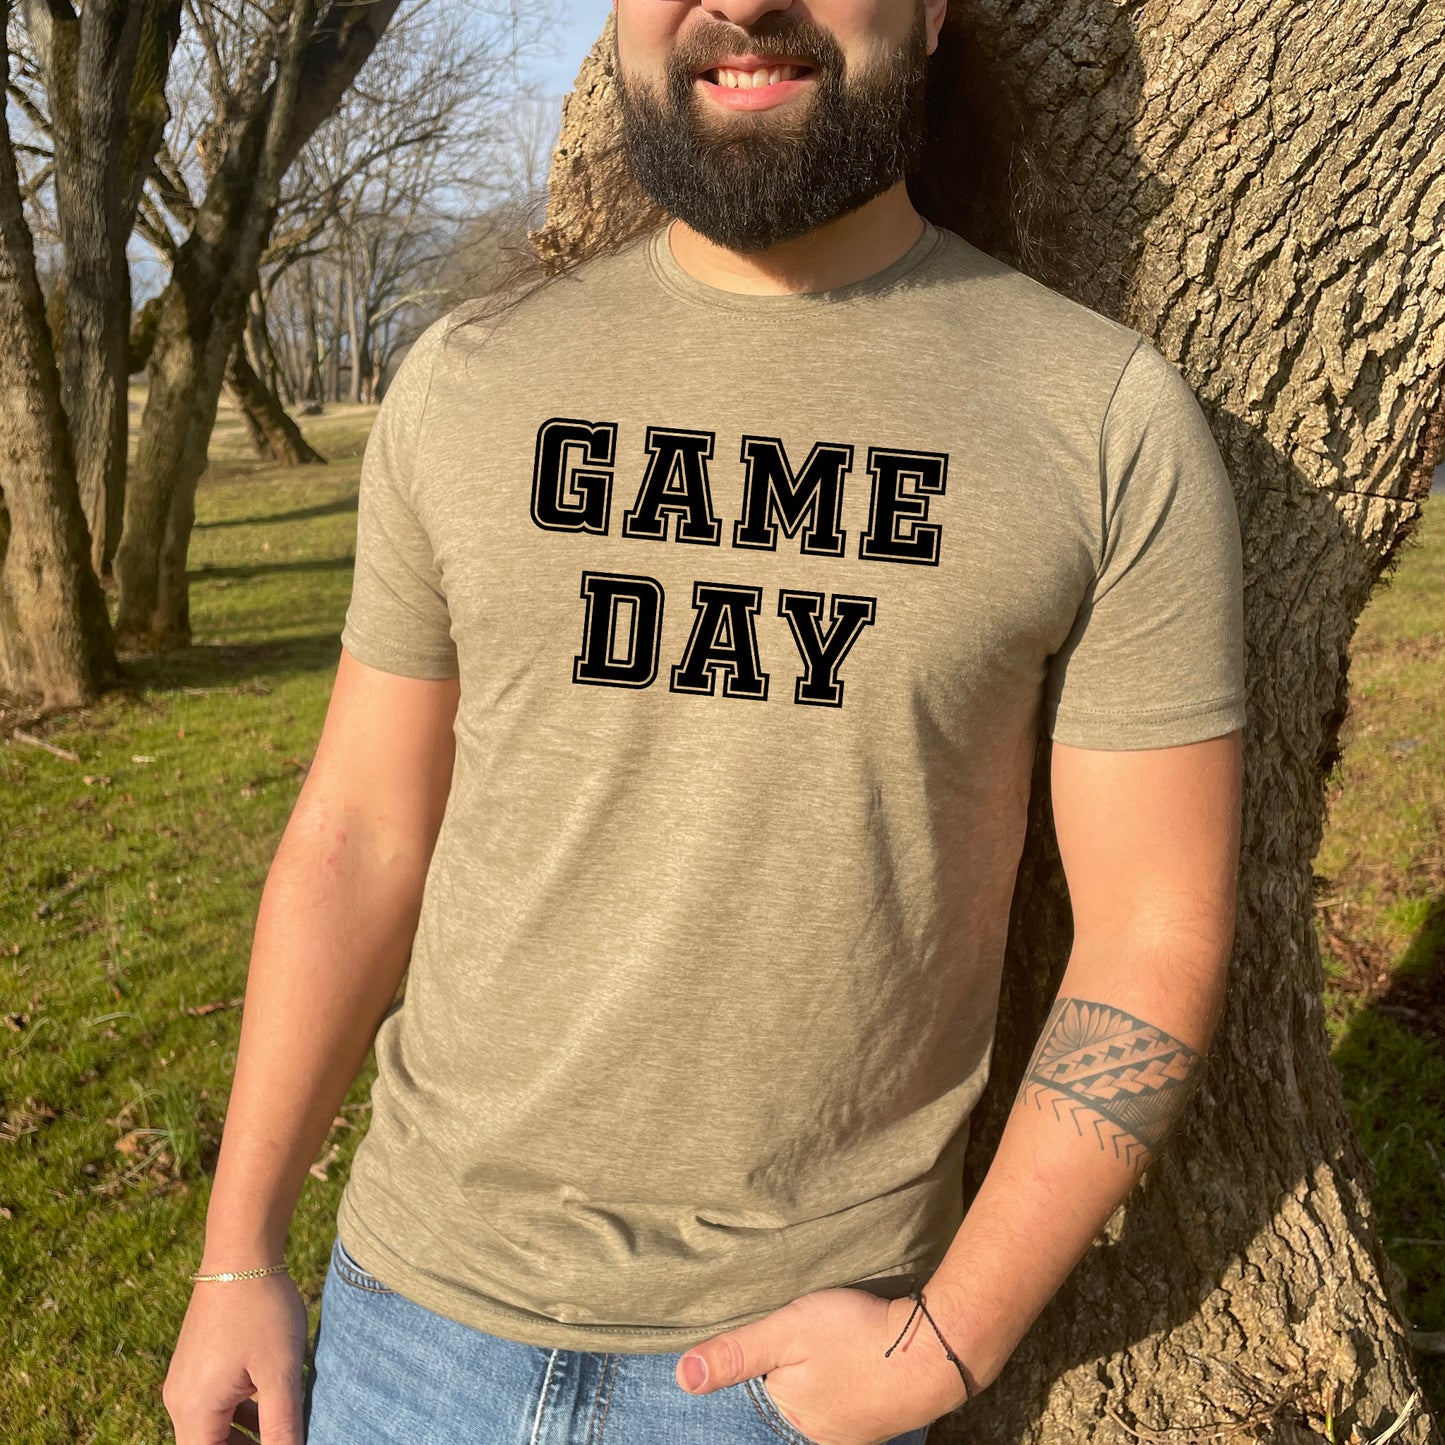 a man standing next to a tree wearing a game day shirt